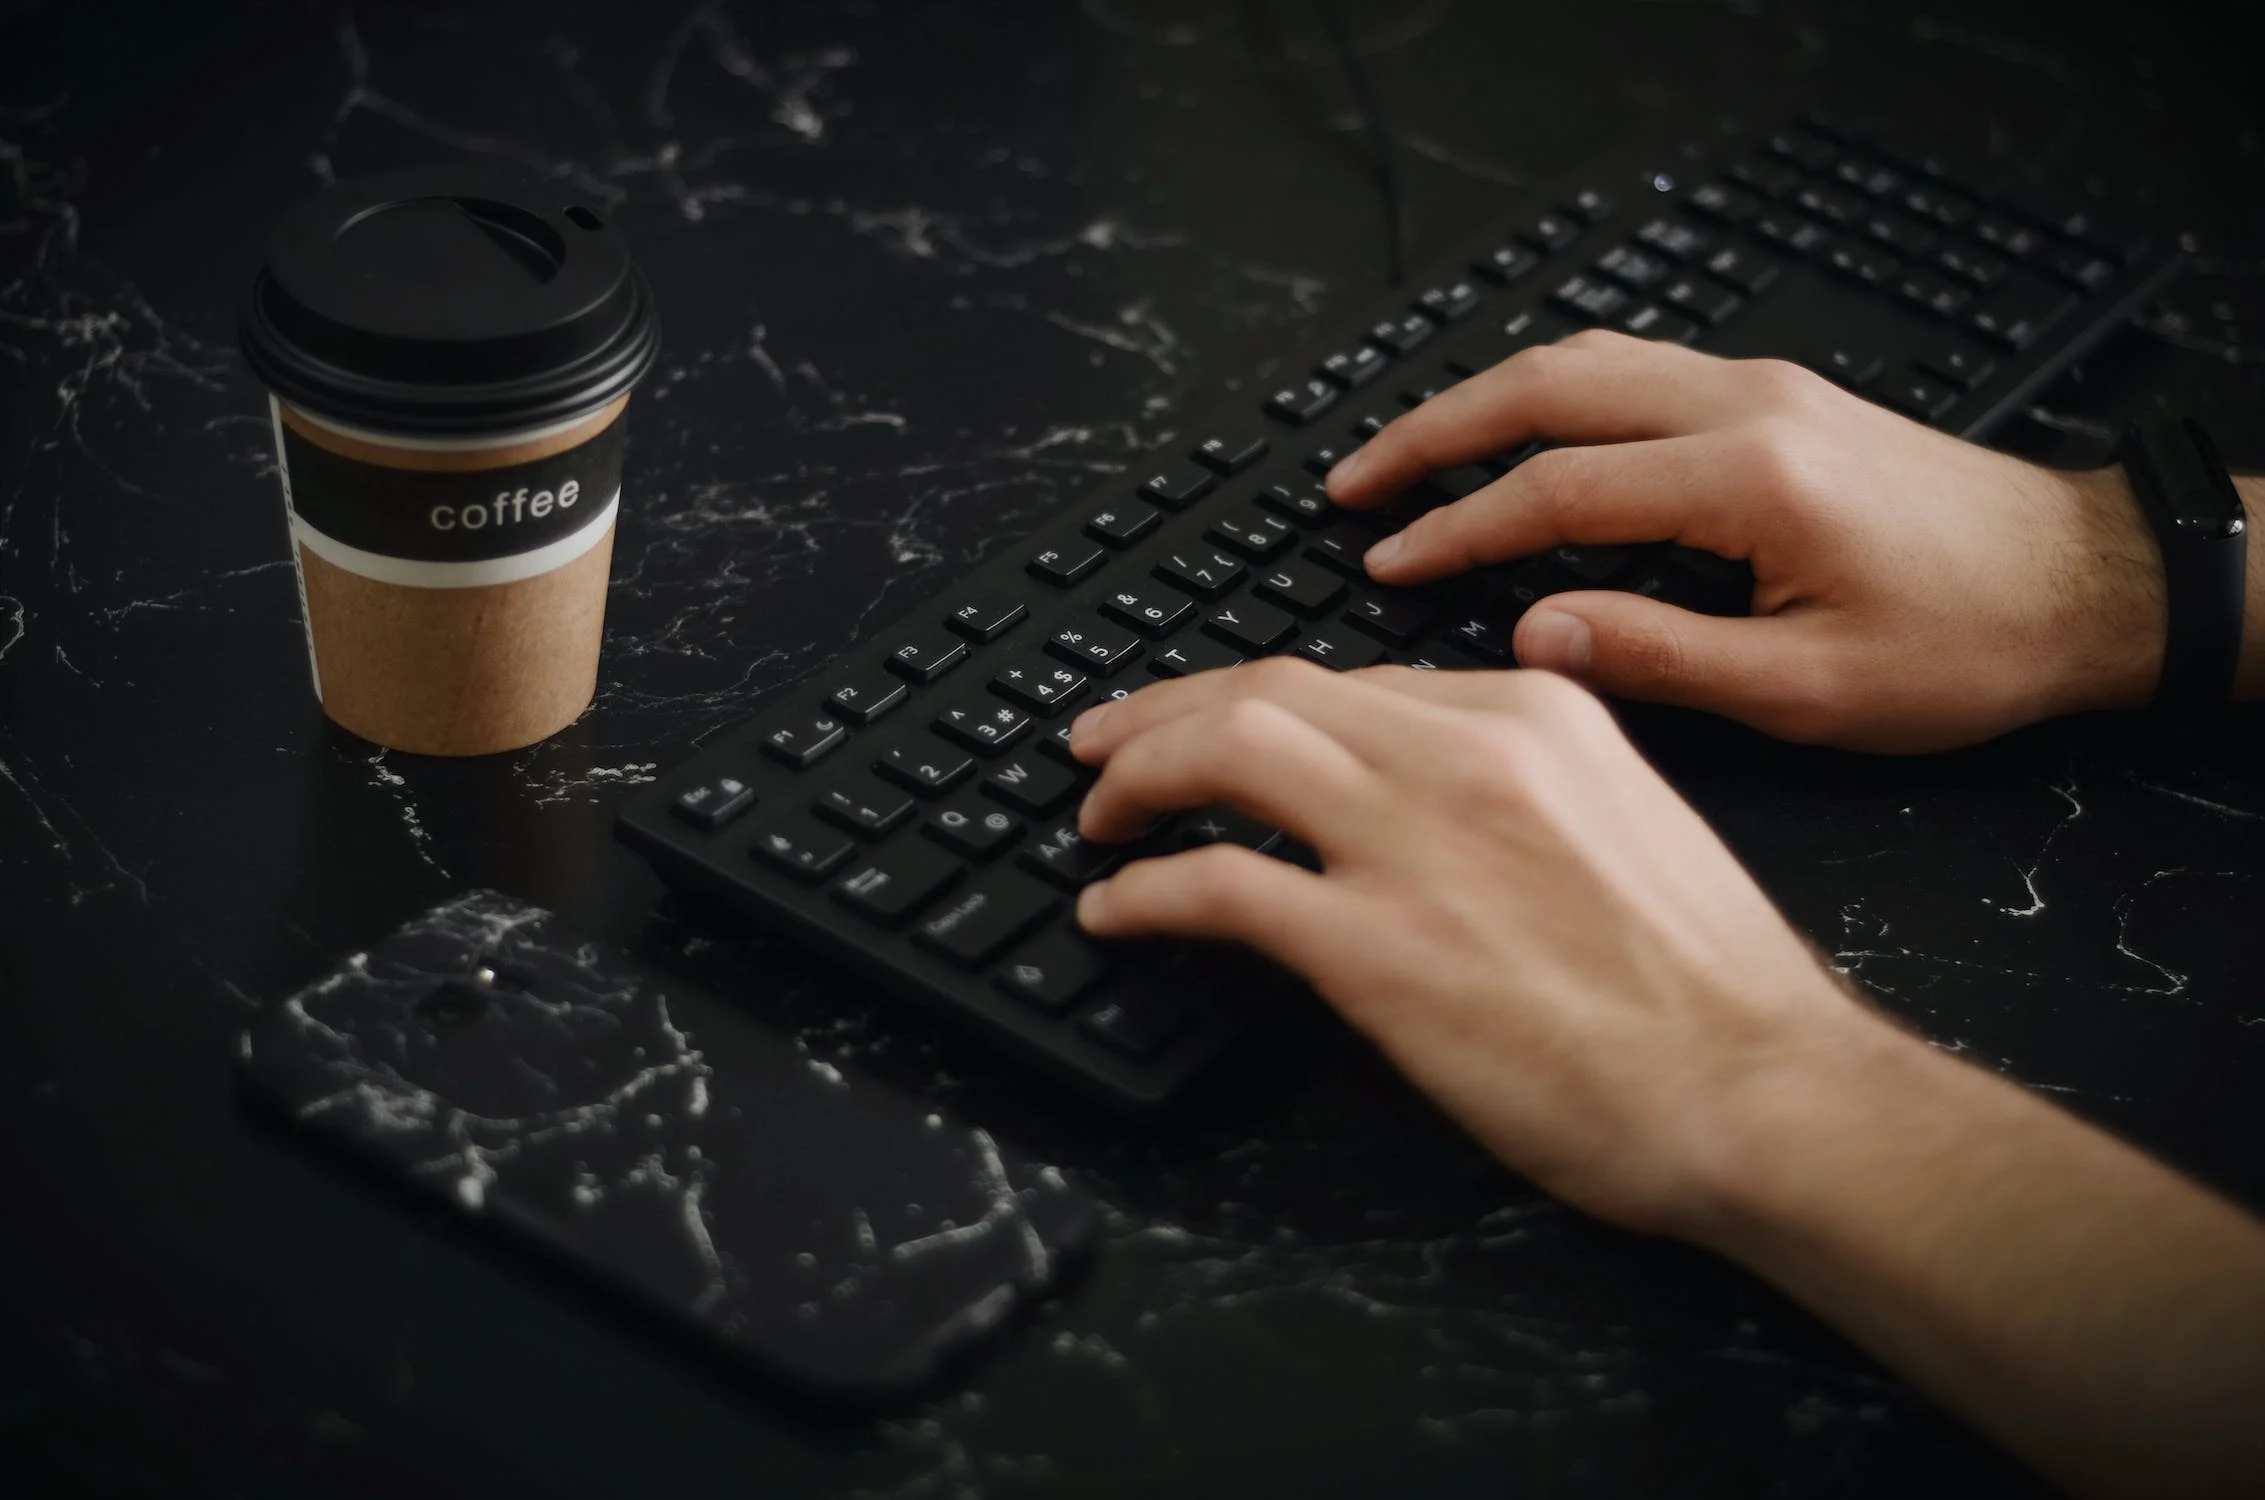 Person typing on black keyboard